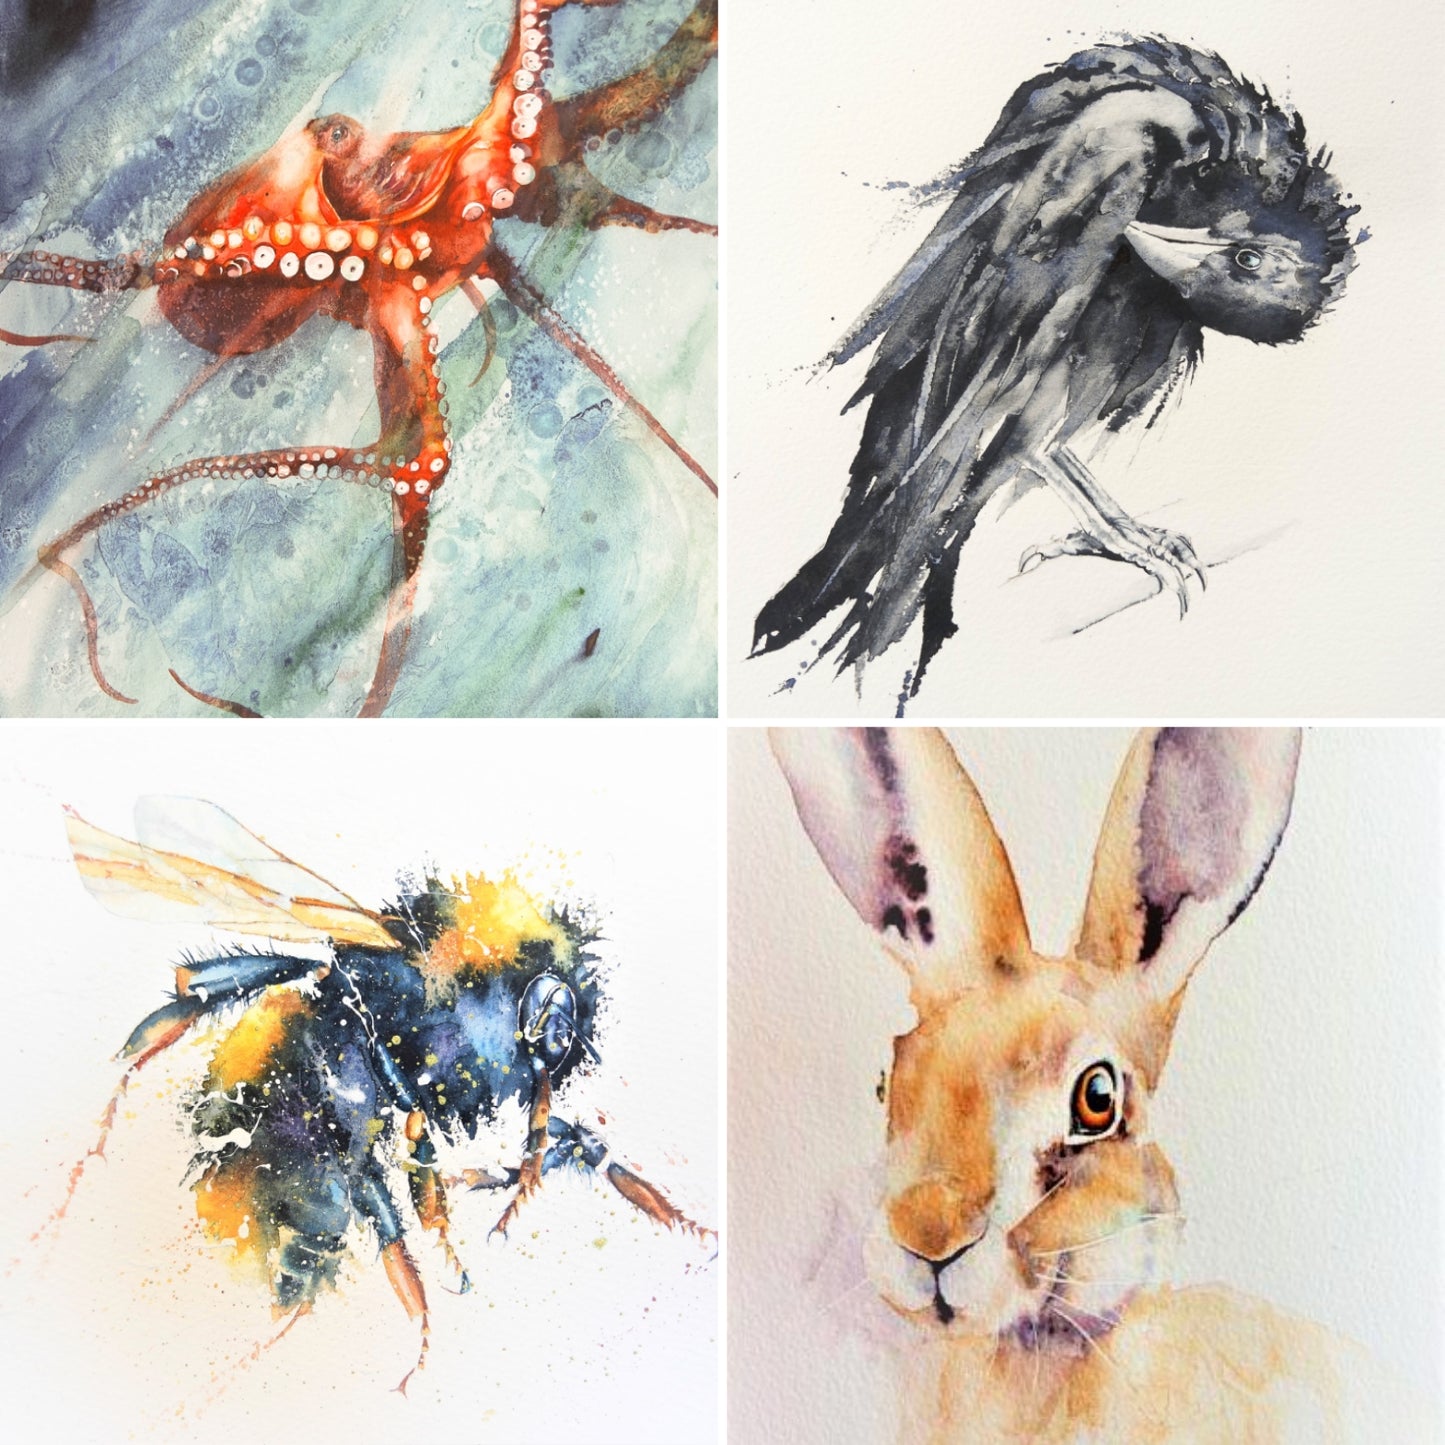 Rachel's wildlife artist of the year pieces ...crow, hare, bee and octopus